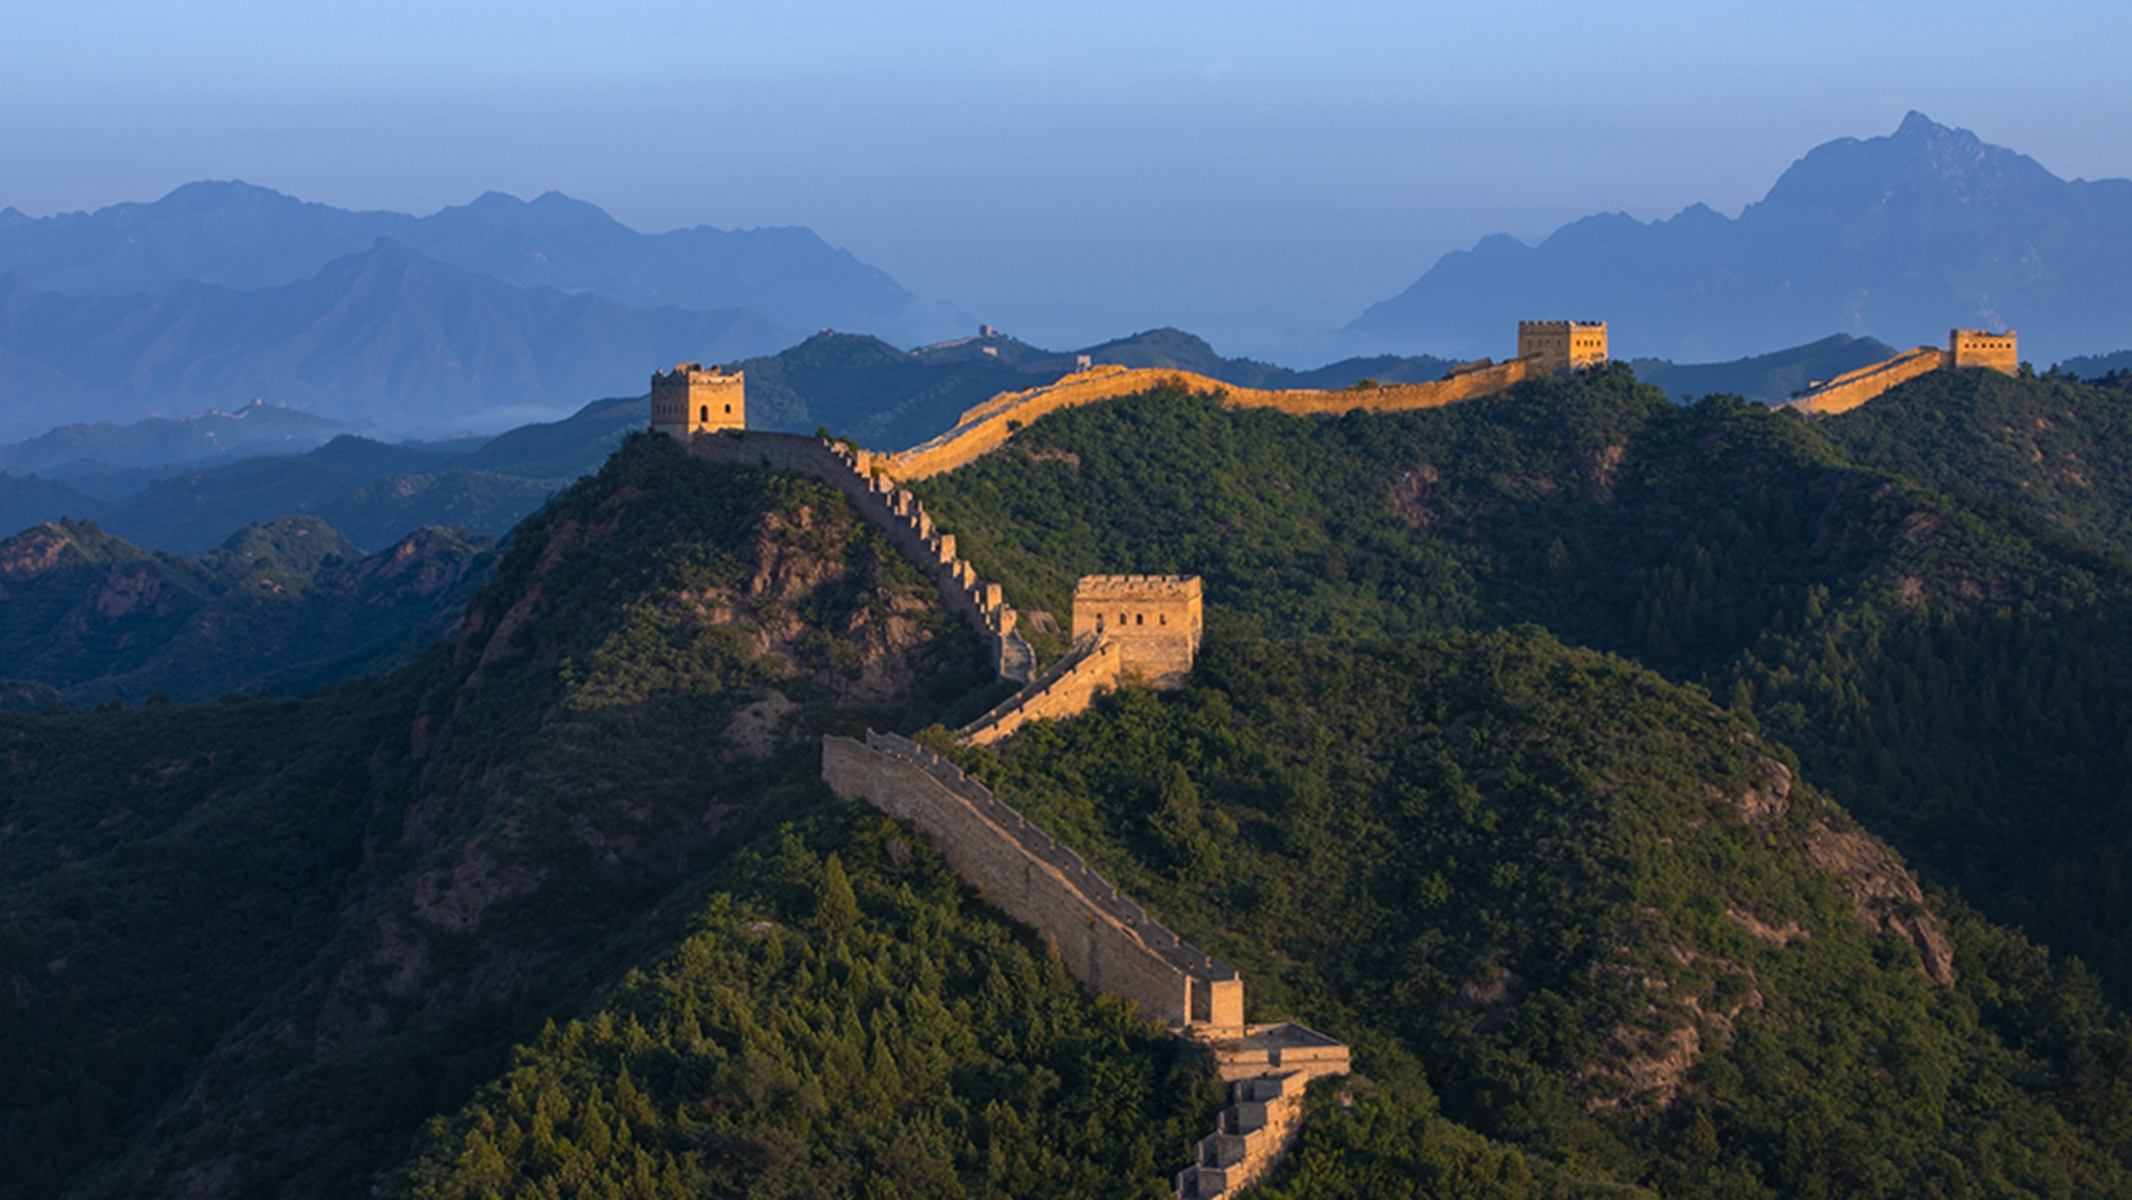 Live: Explore the vibrant colors and serenity of Jinshanling Great Wall